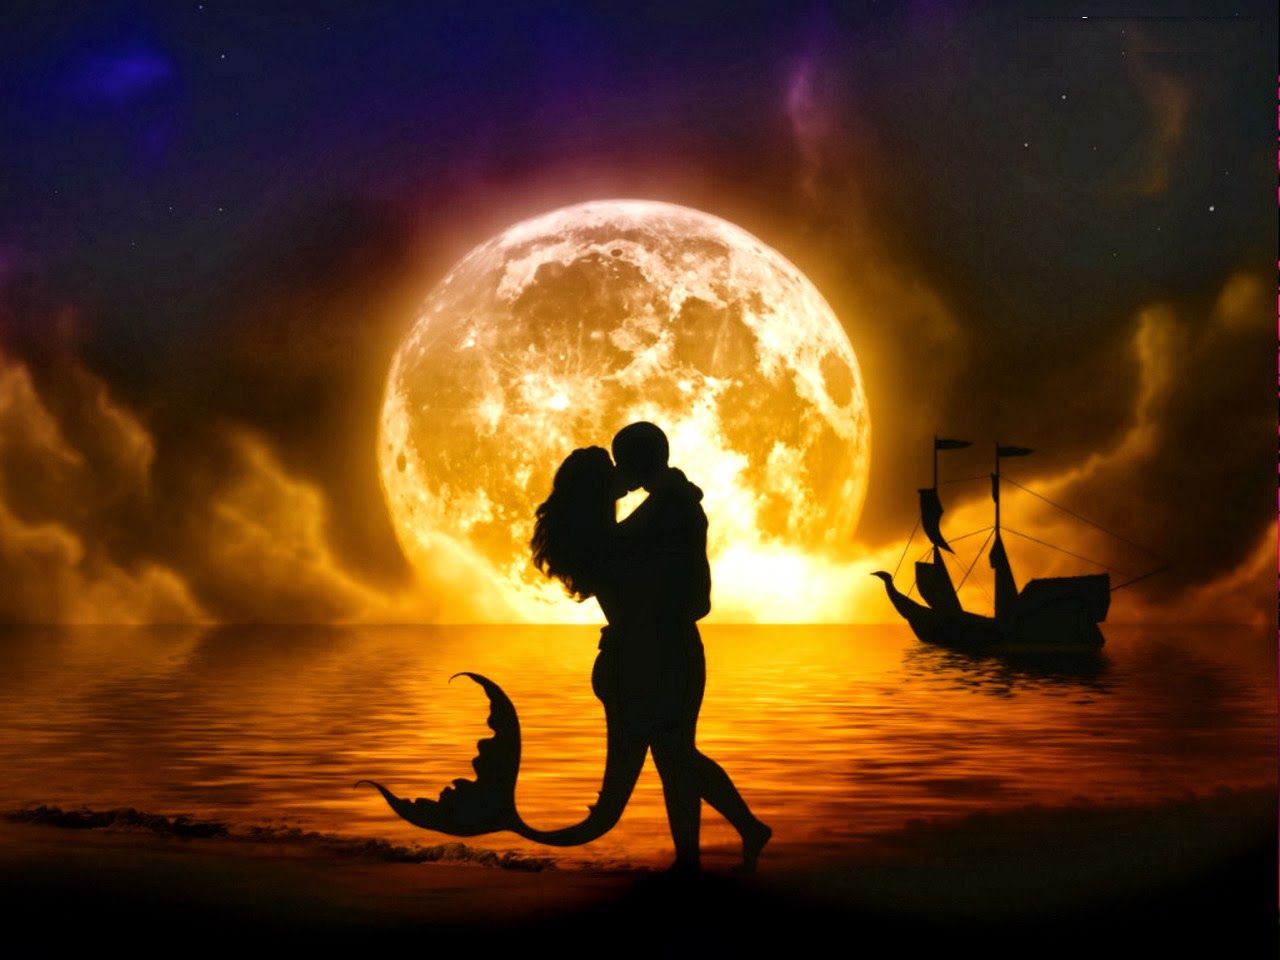 Romantic Love Pictures for her - Hug and Kiss, Couples Dance in ...